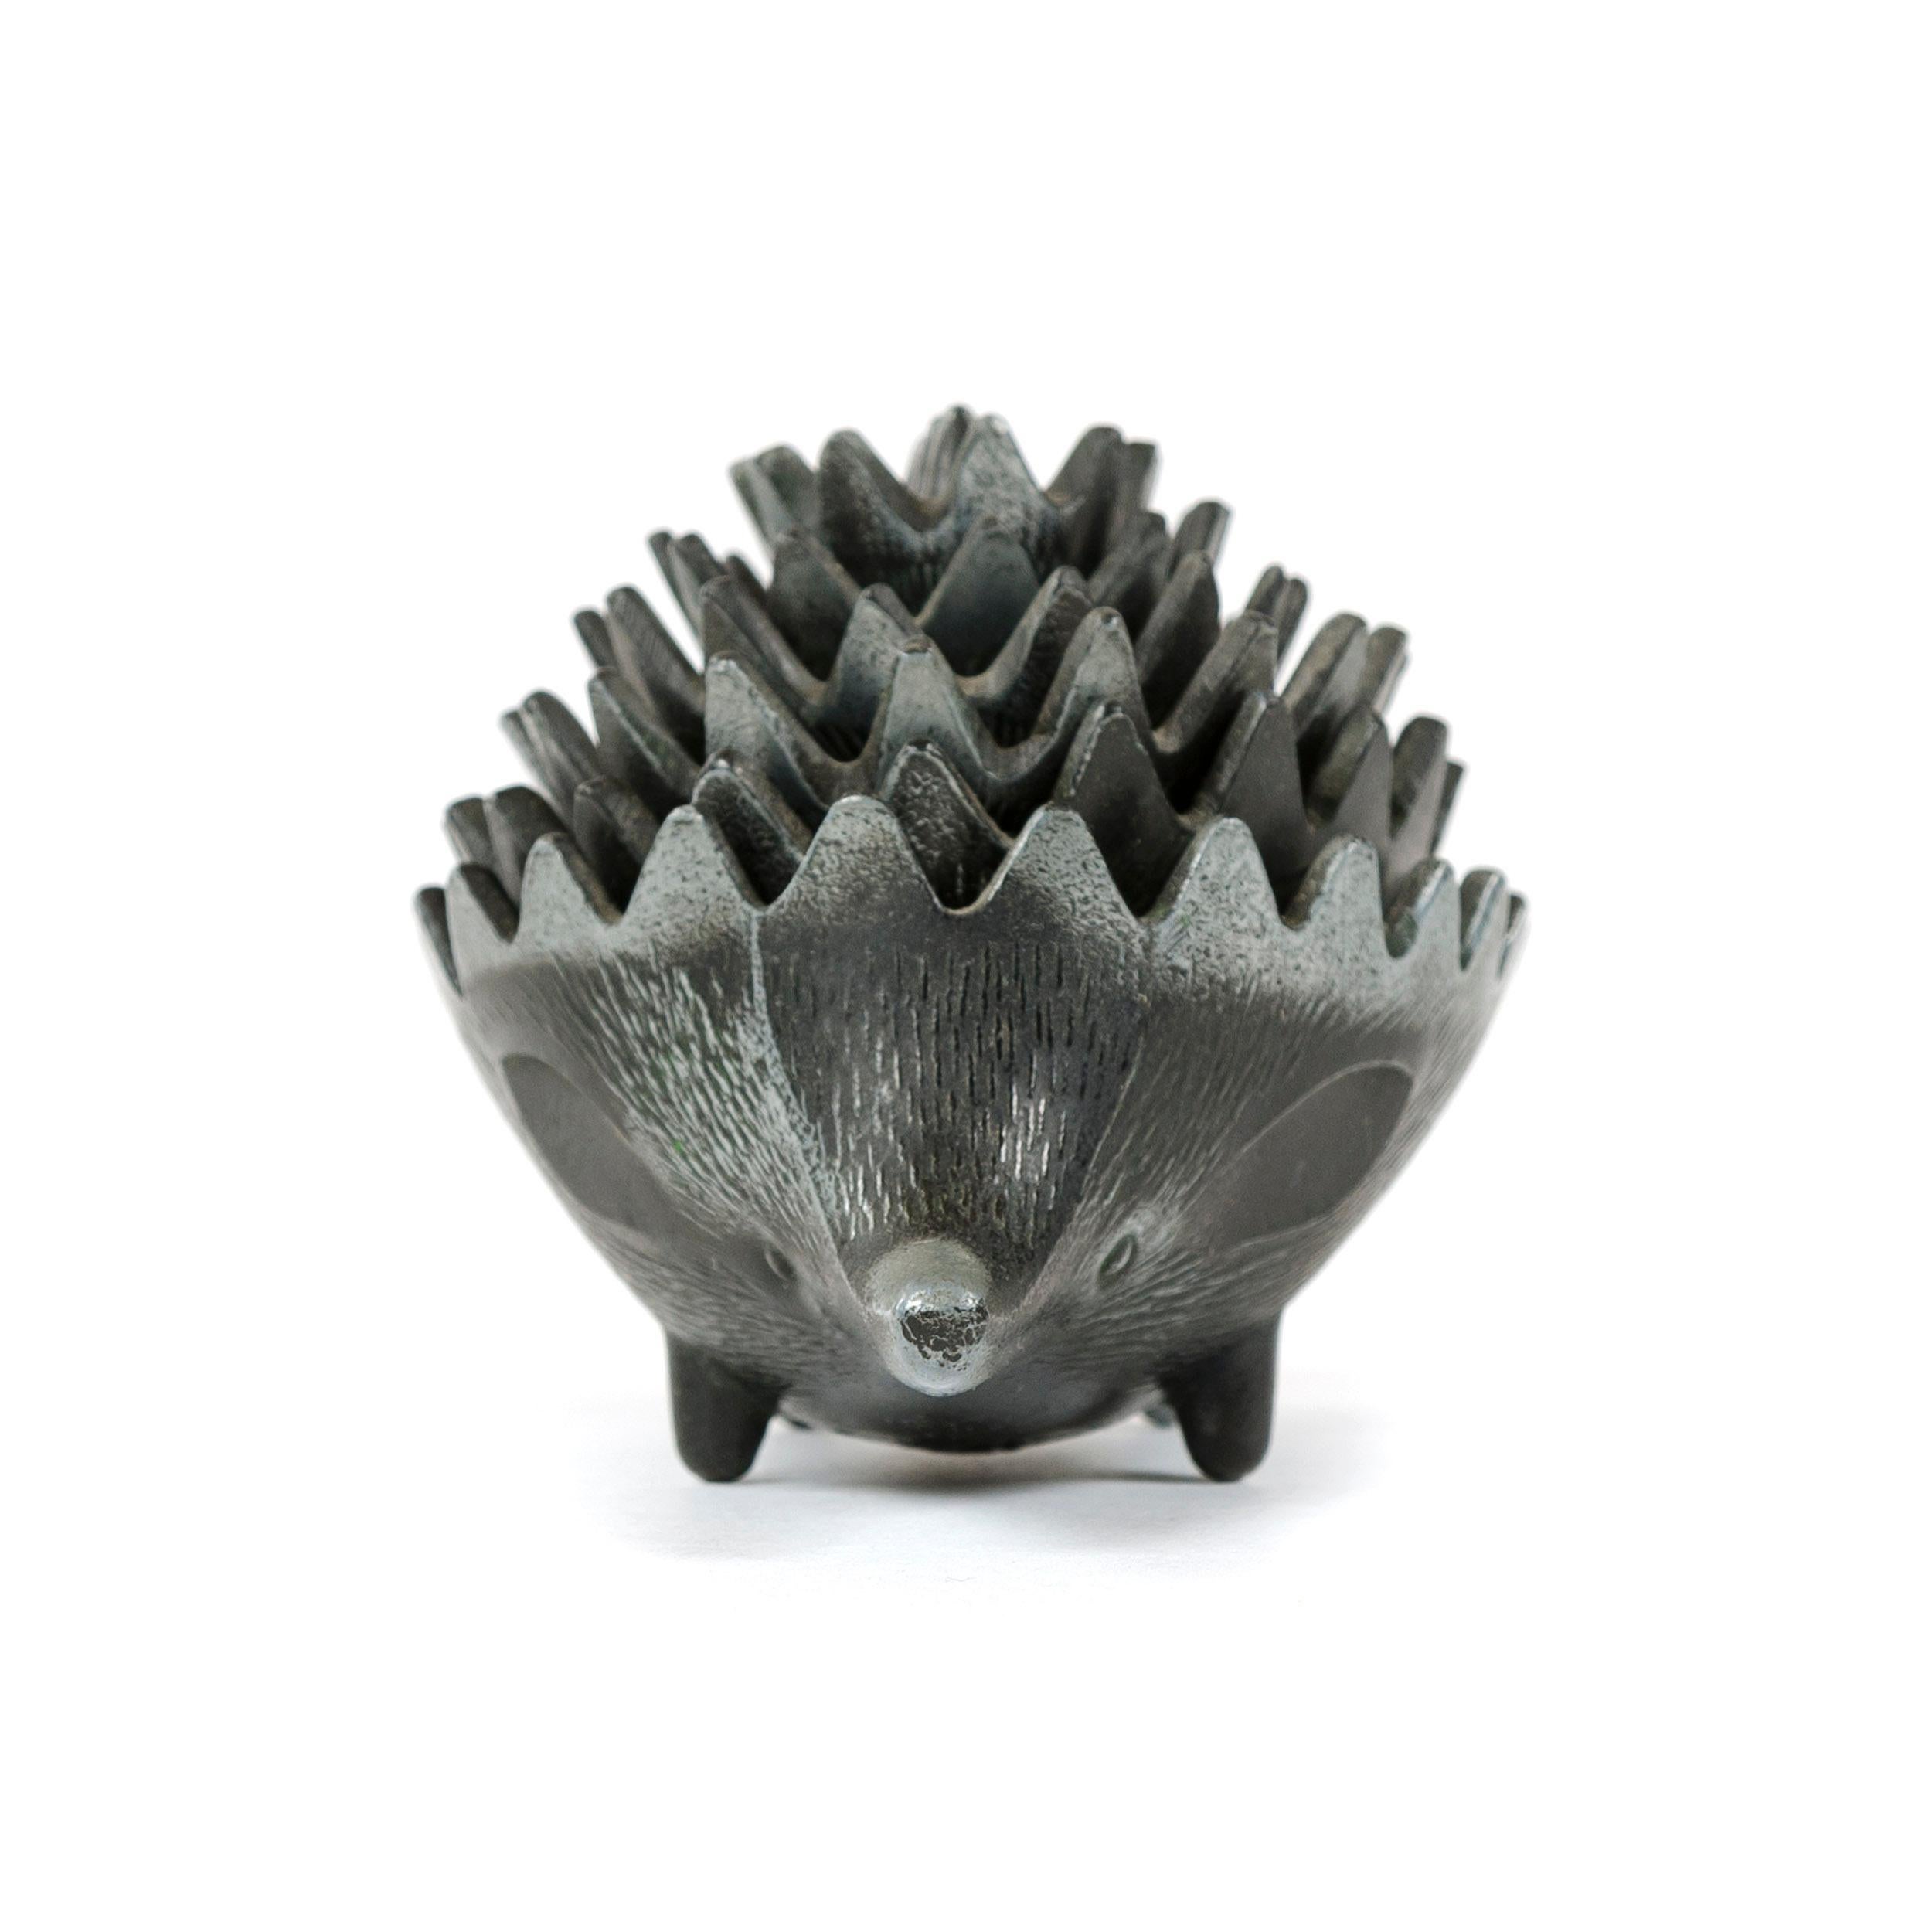 A set of (6) pewter stacking ashtrays in the form of a hedgehog, in the style of Walter Bosse.